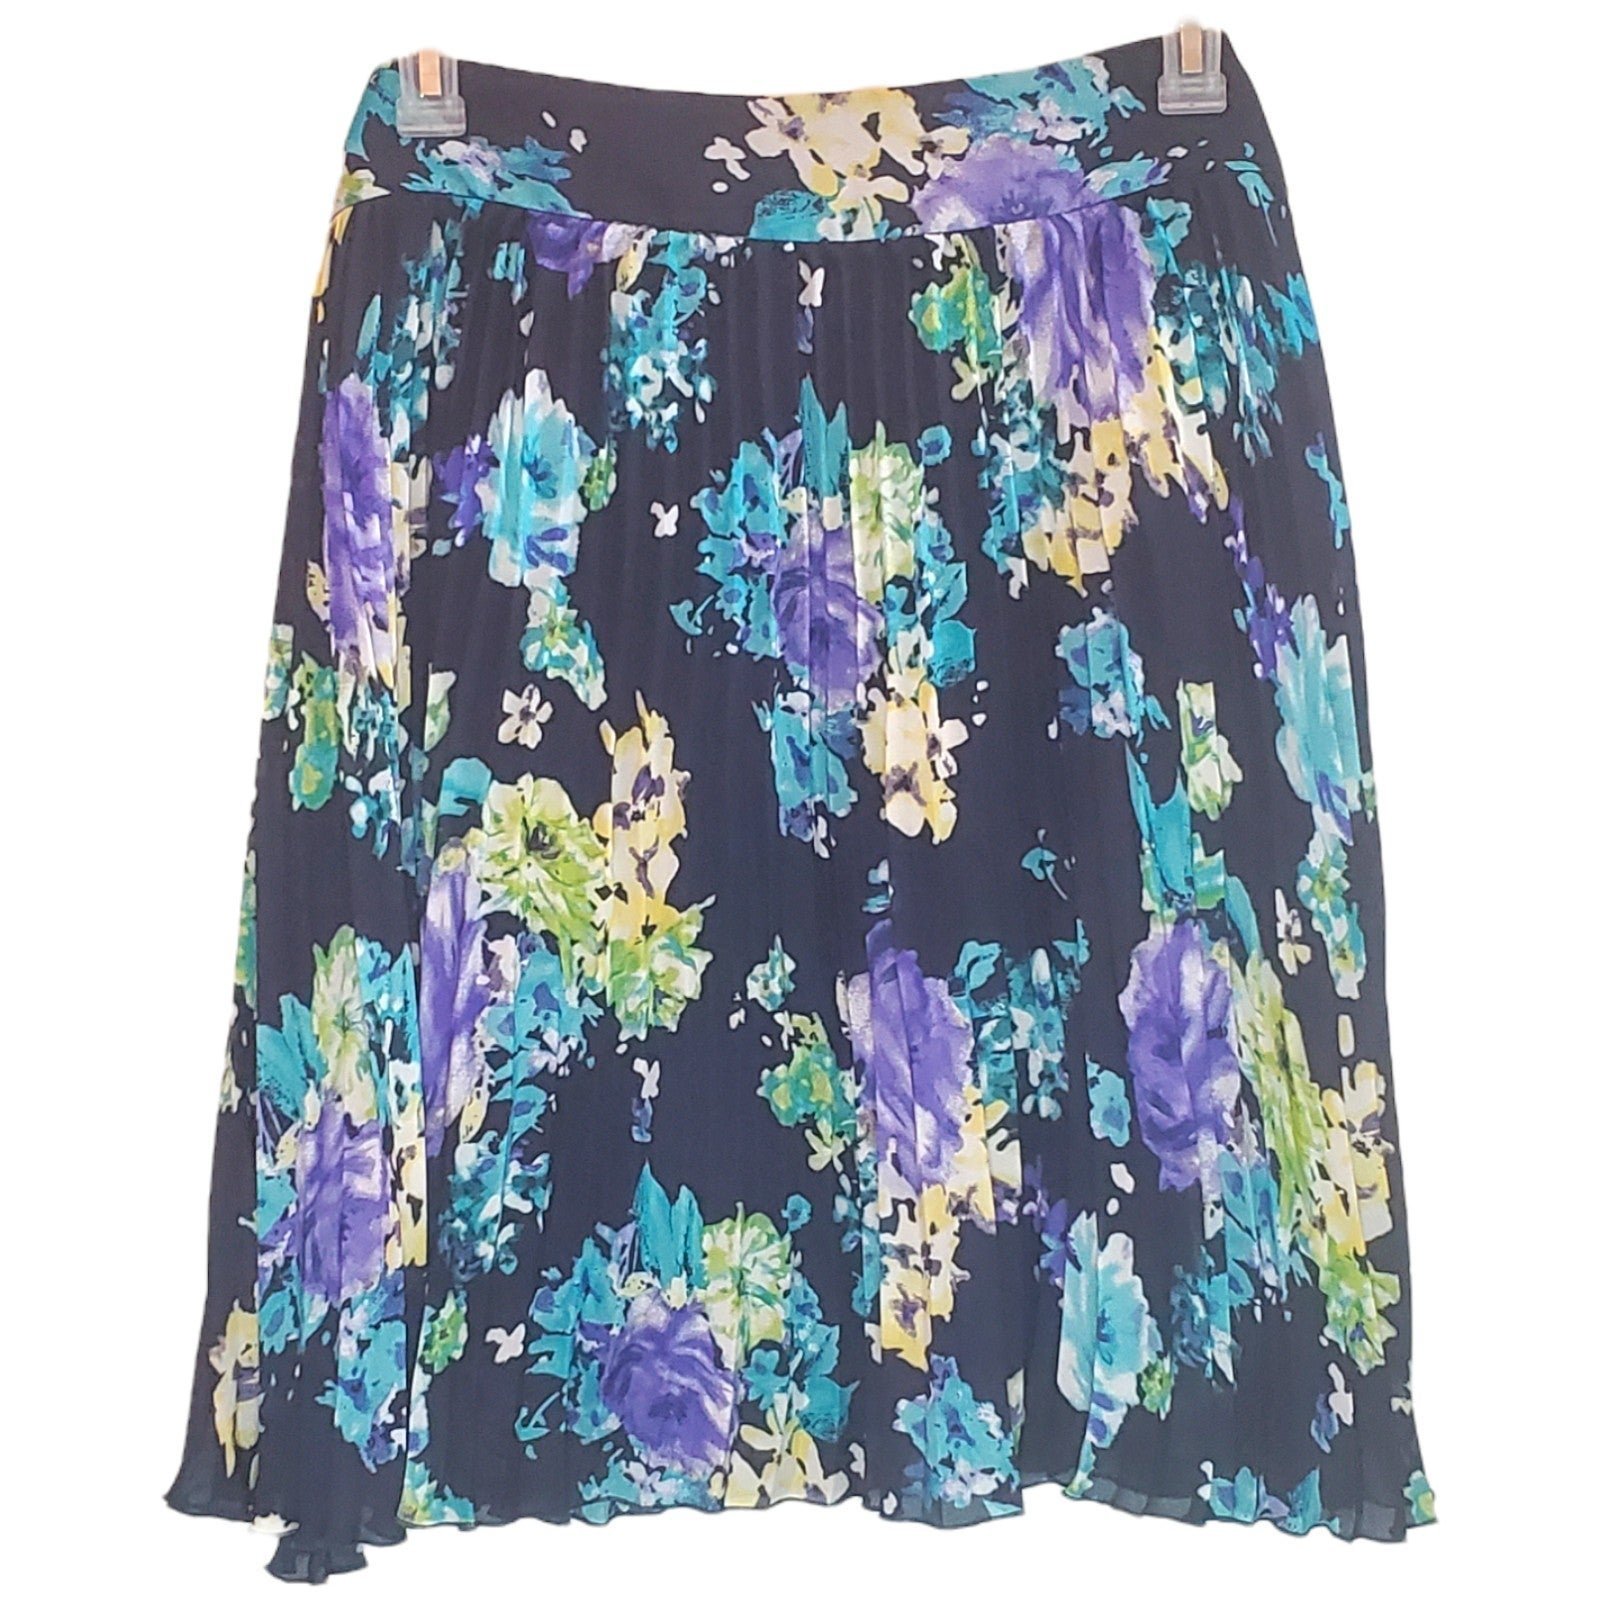 cheapest place to buy  Charter Club Womens Floral Skirt